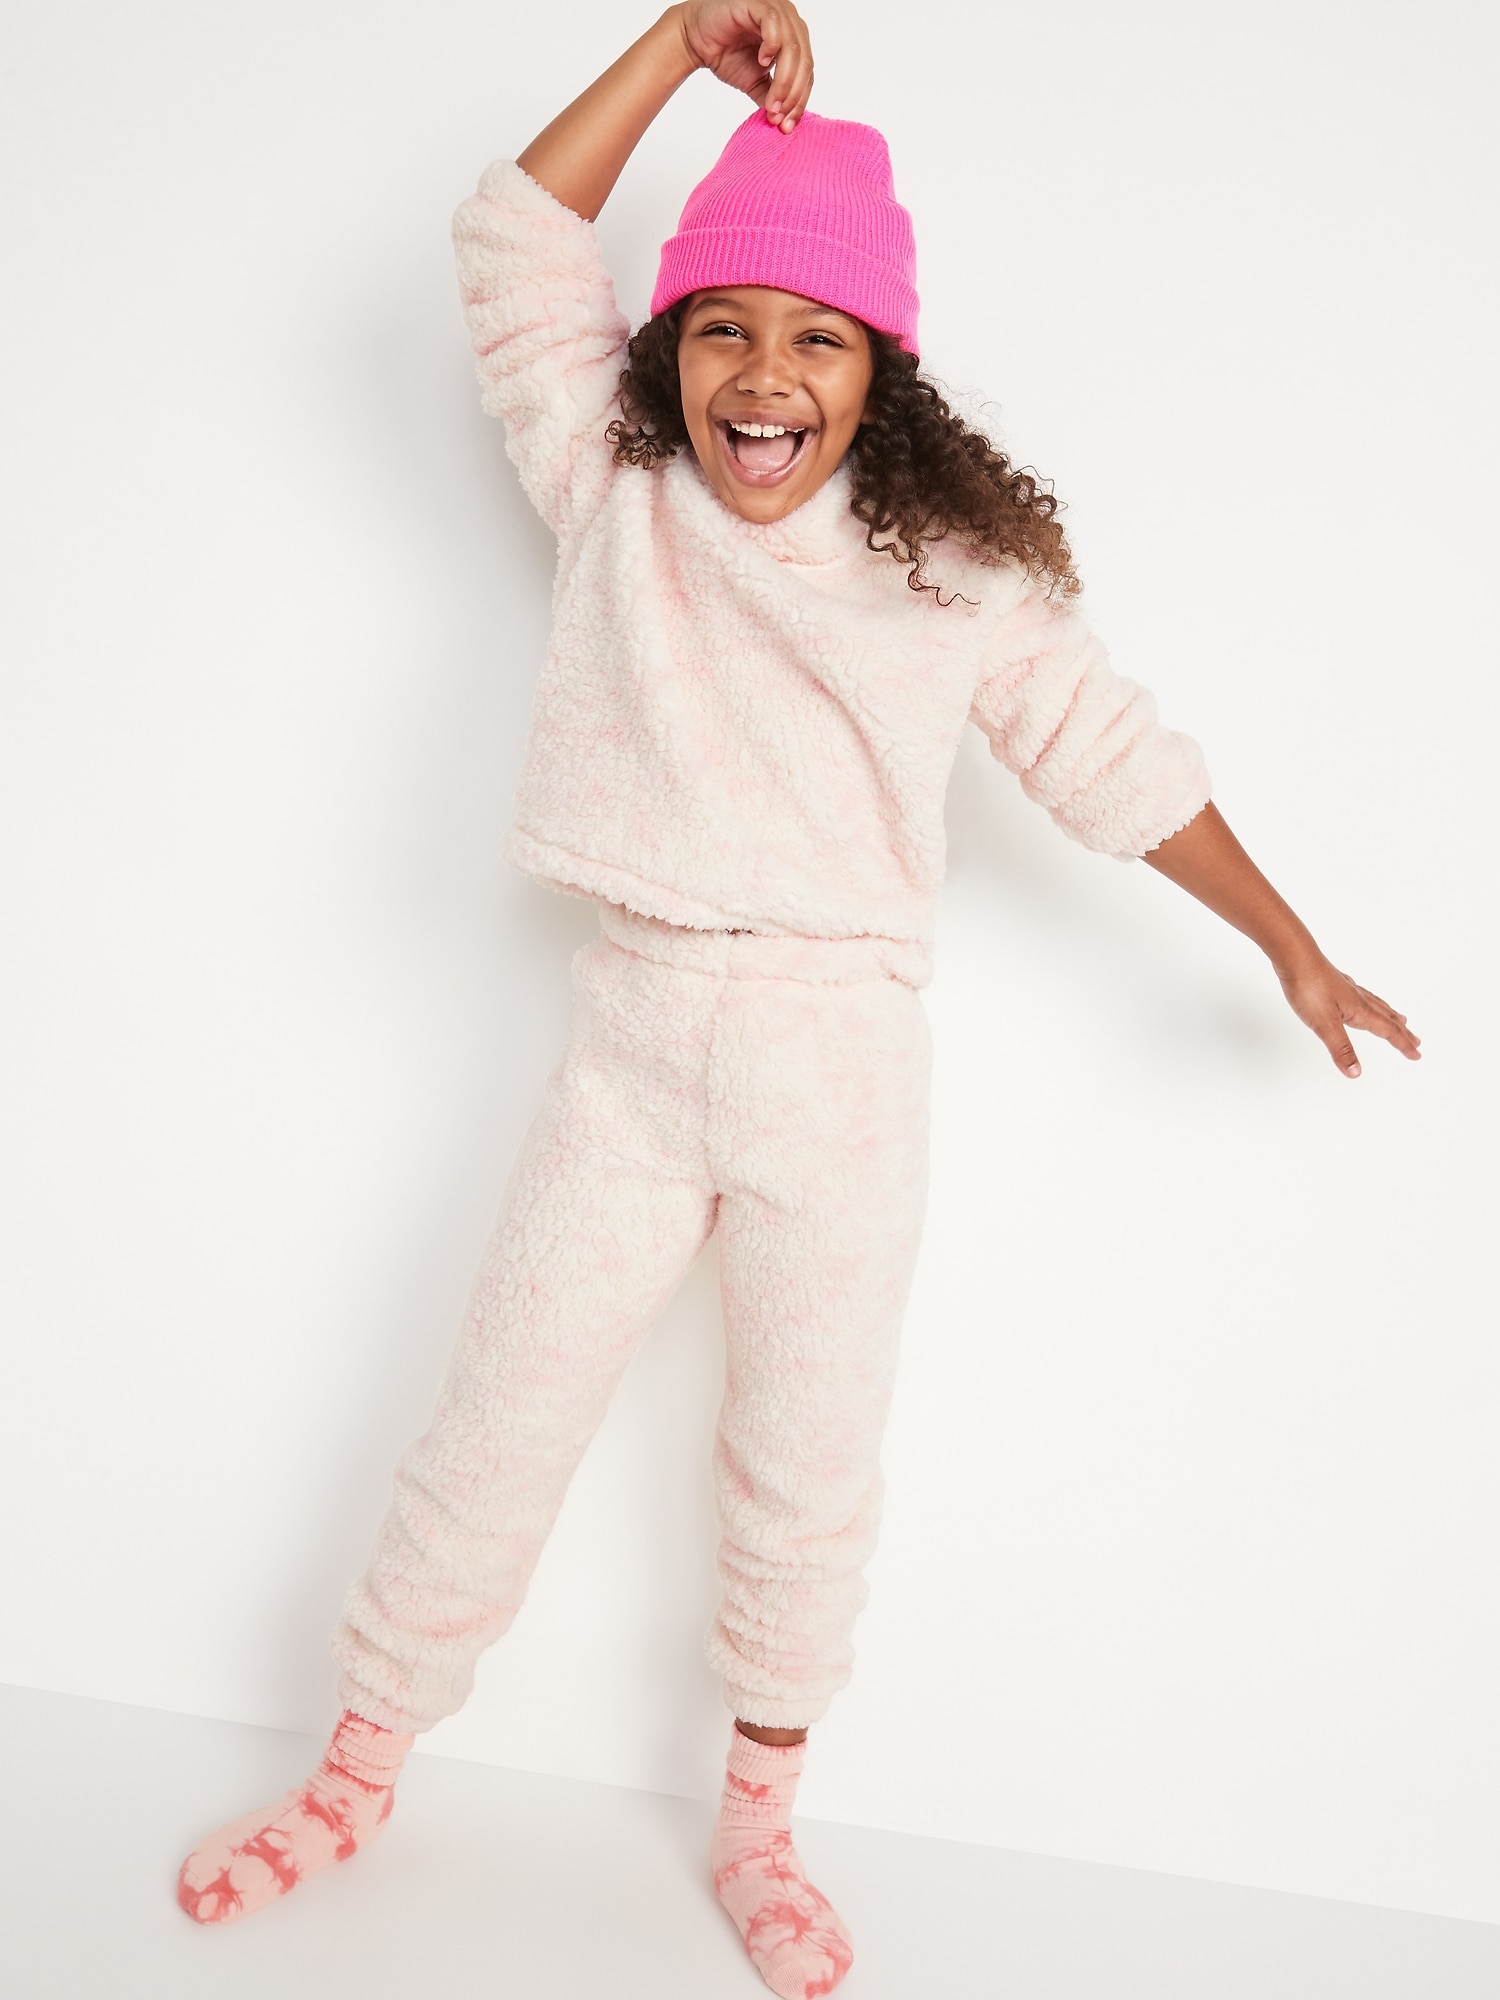 Cozy Sherpa Cowl-Neck Pajama Top & Joggers Set for Girls